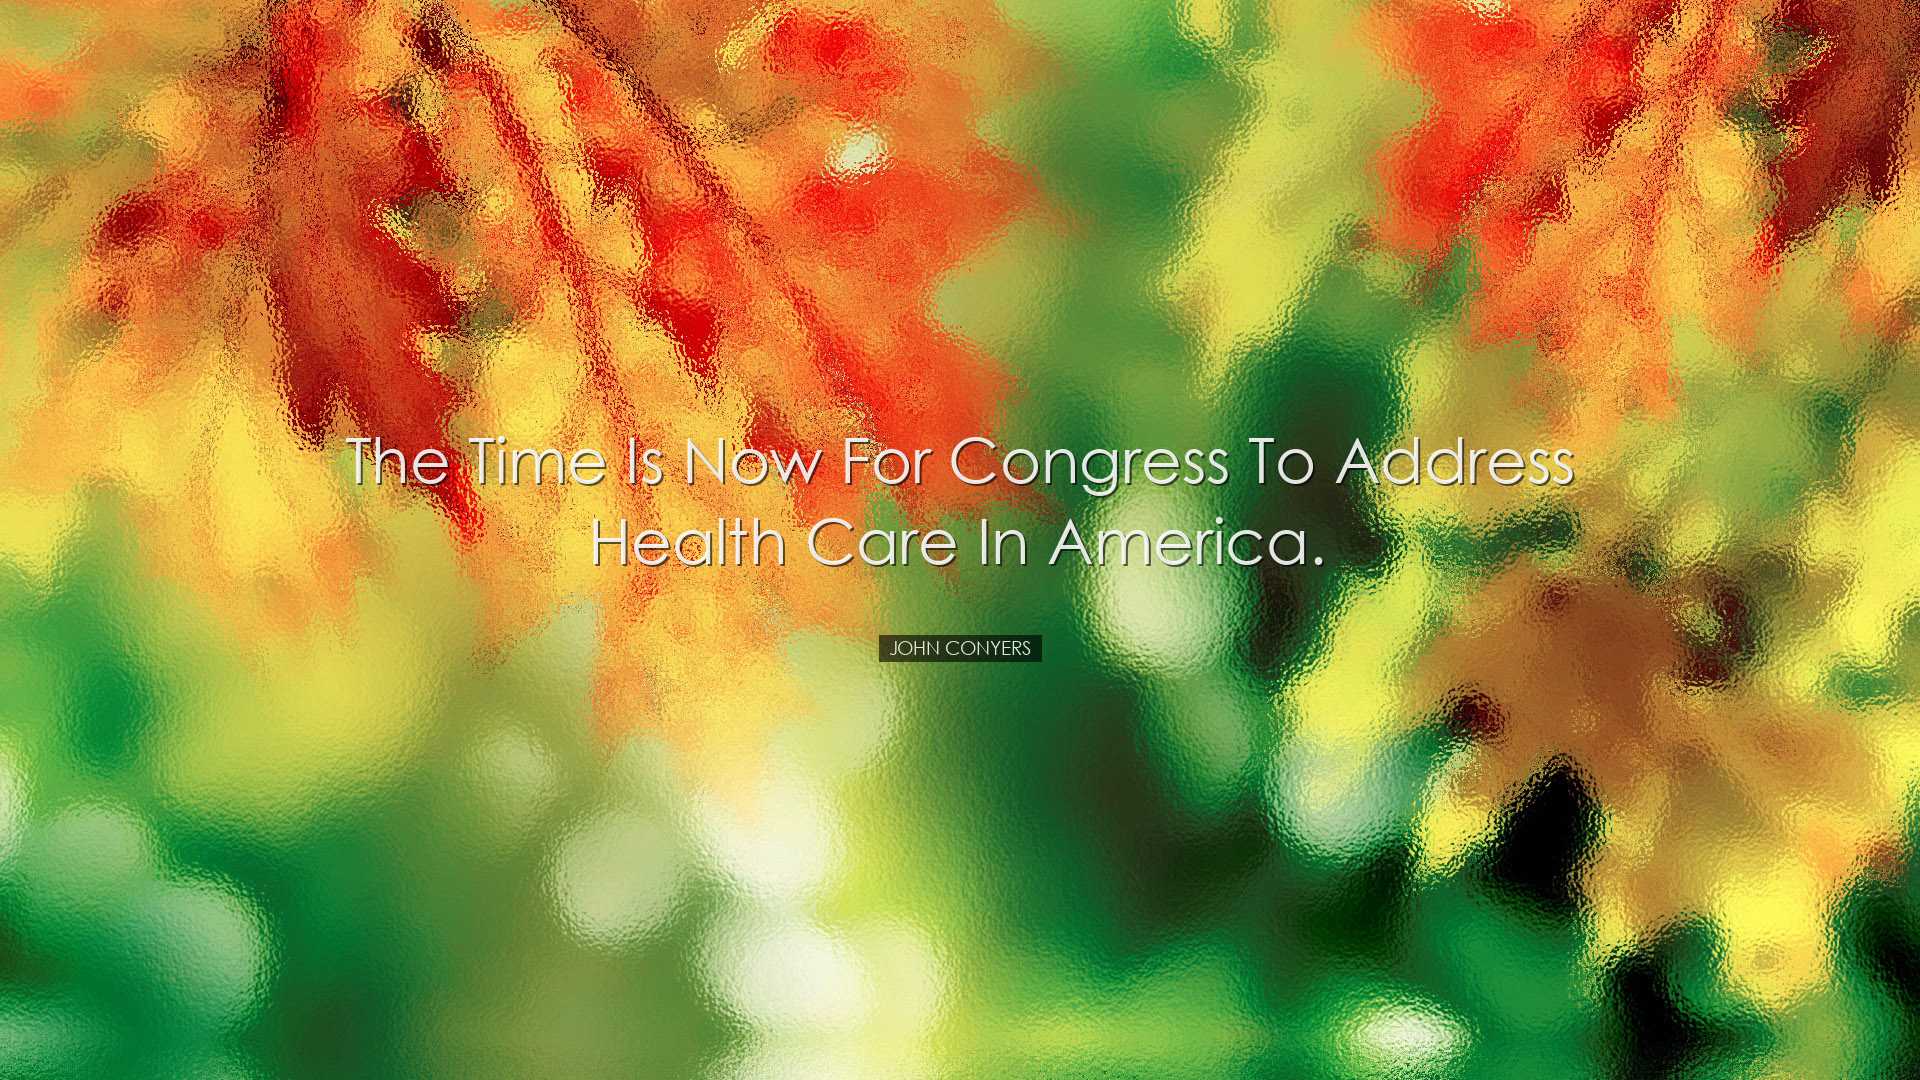 The time is now for Congress to address health care in America. -